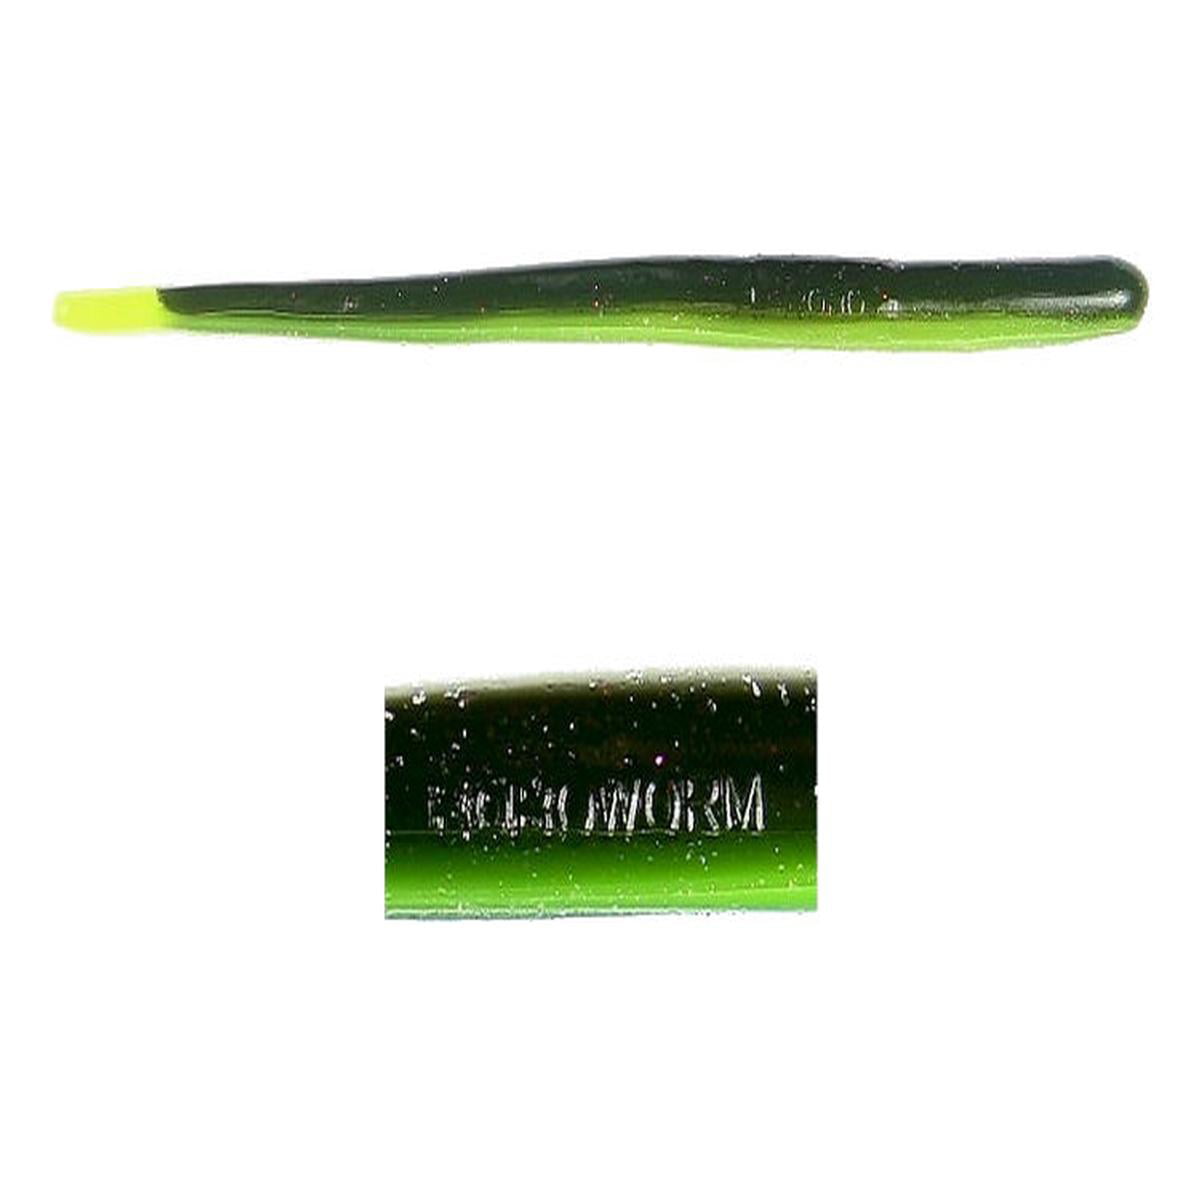 Zoom Dead Ringer Ring Worm Fishing Bait, Watermelon Seed, 4